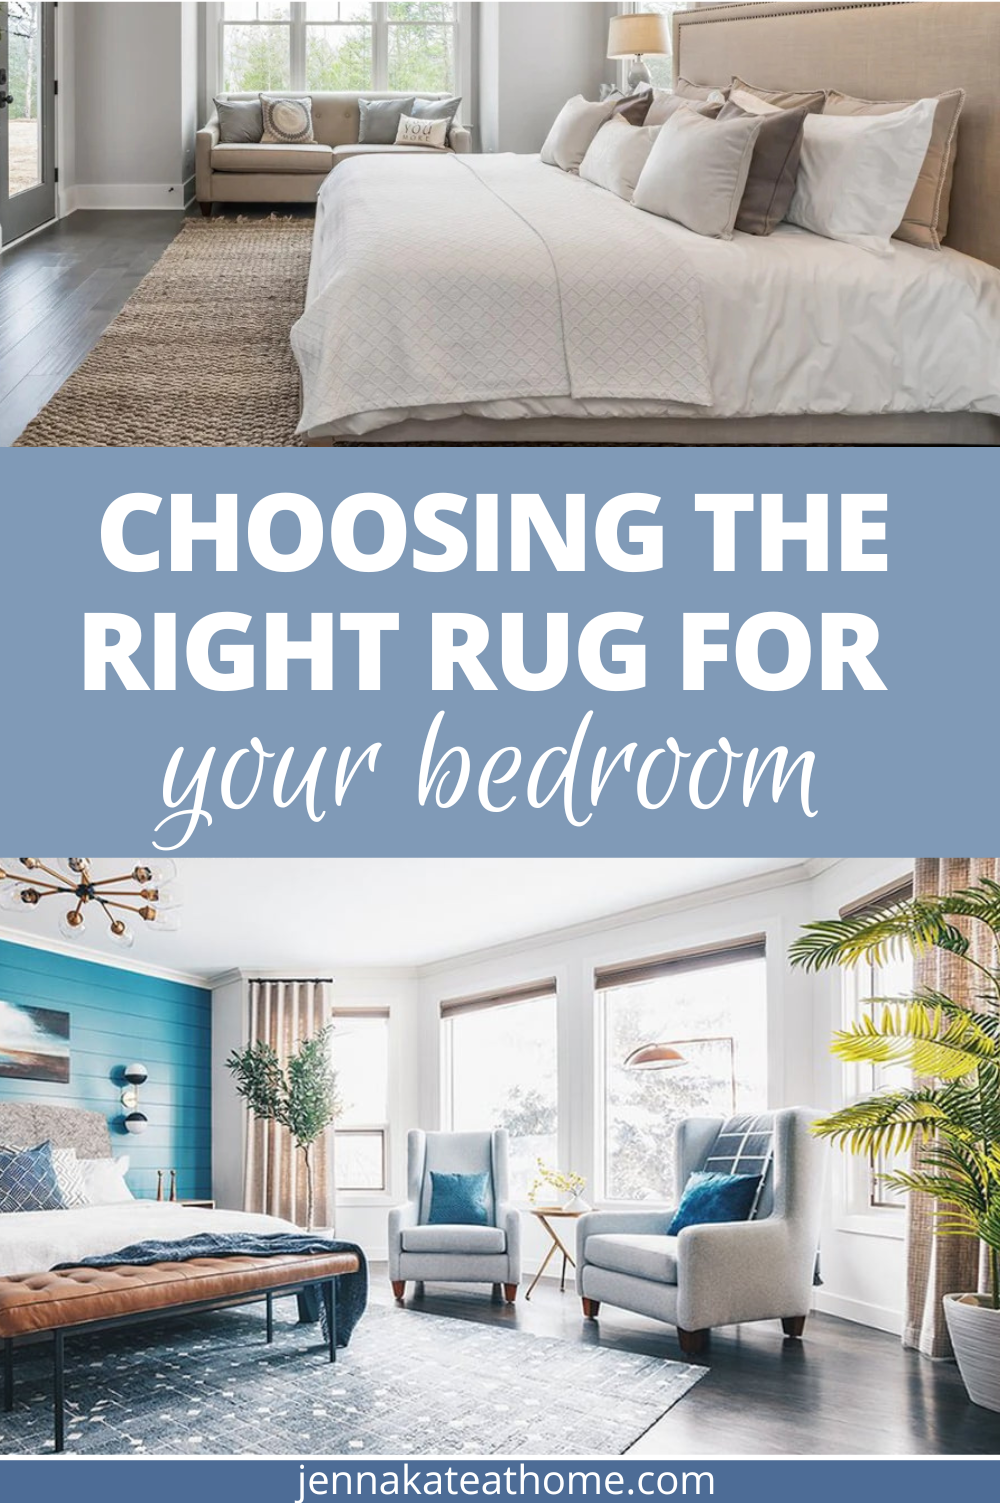 How to choose the right rug for your bedroom